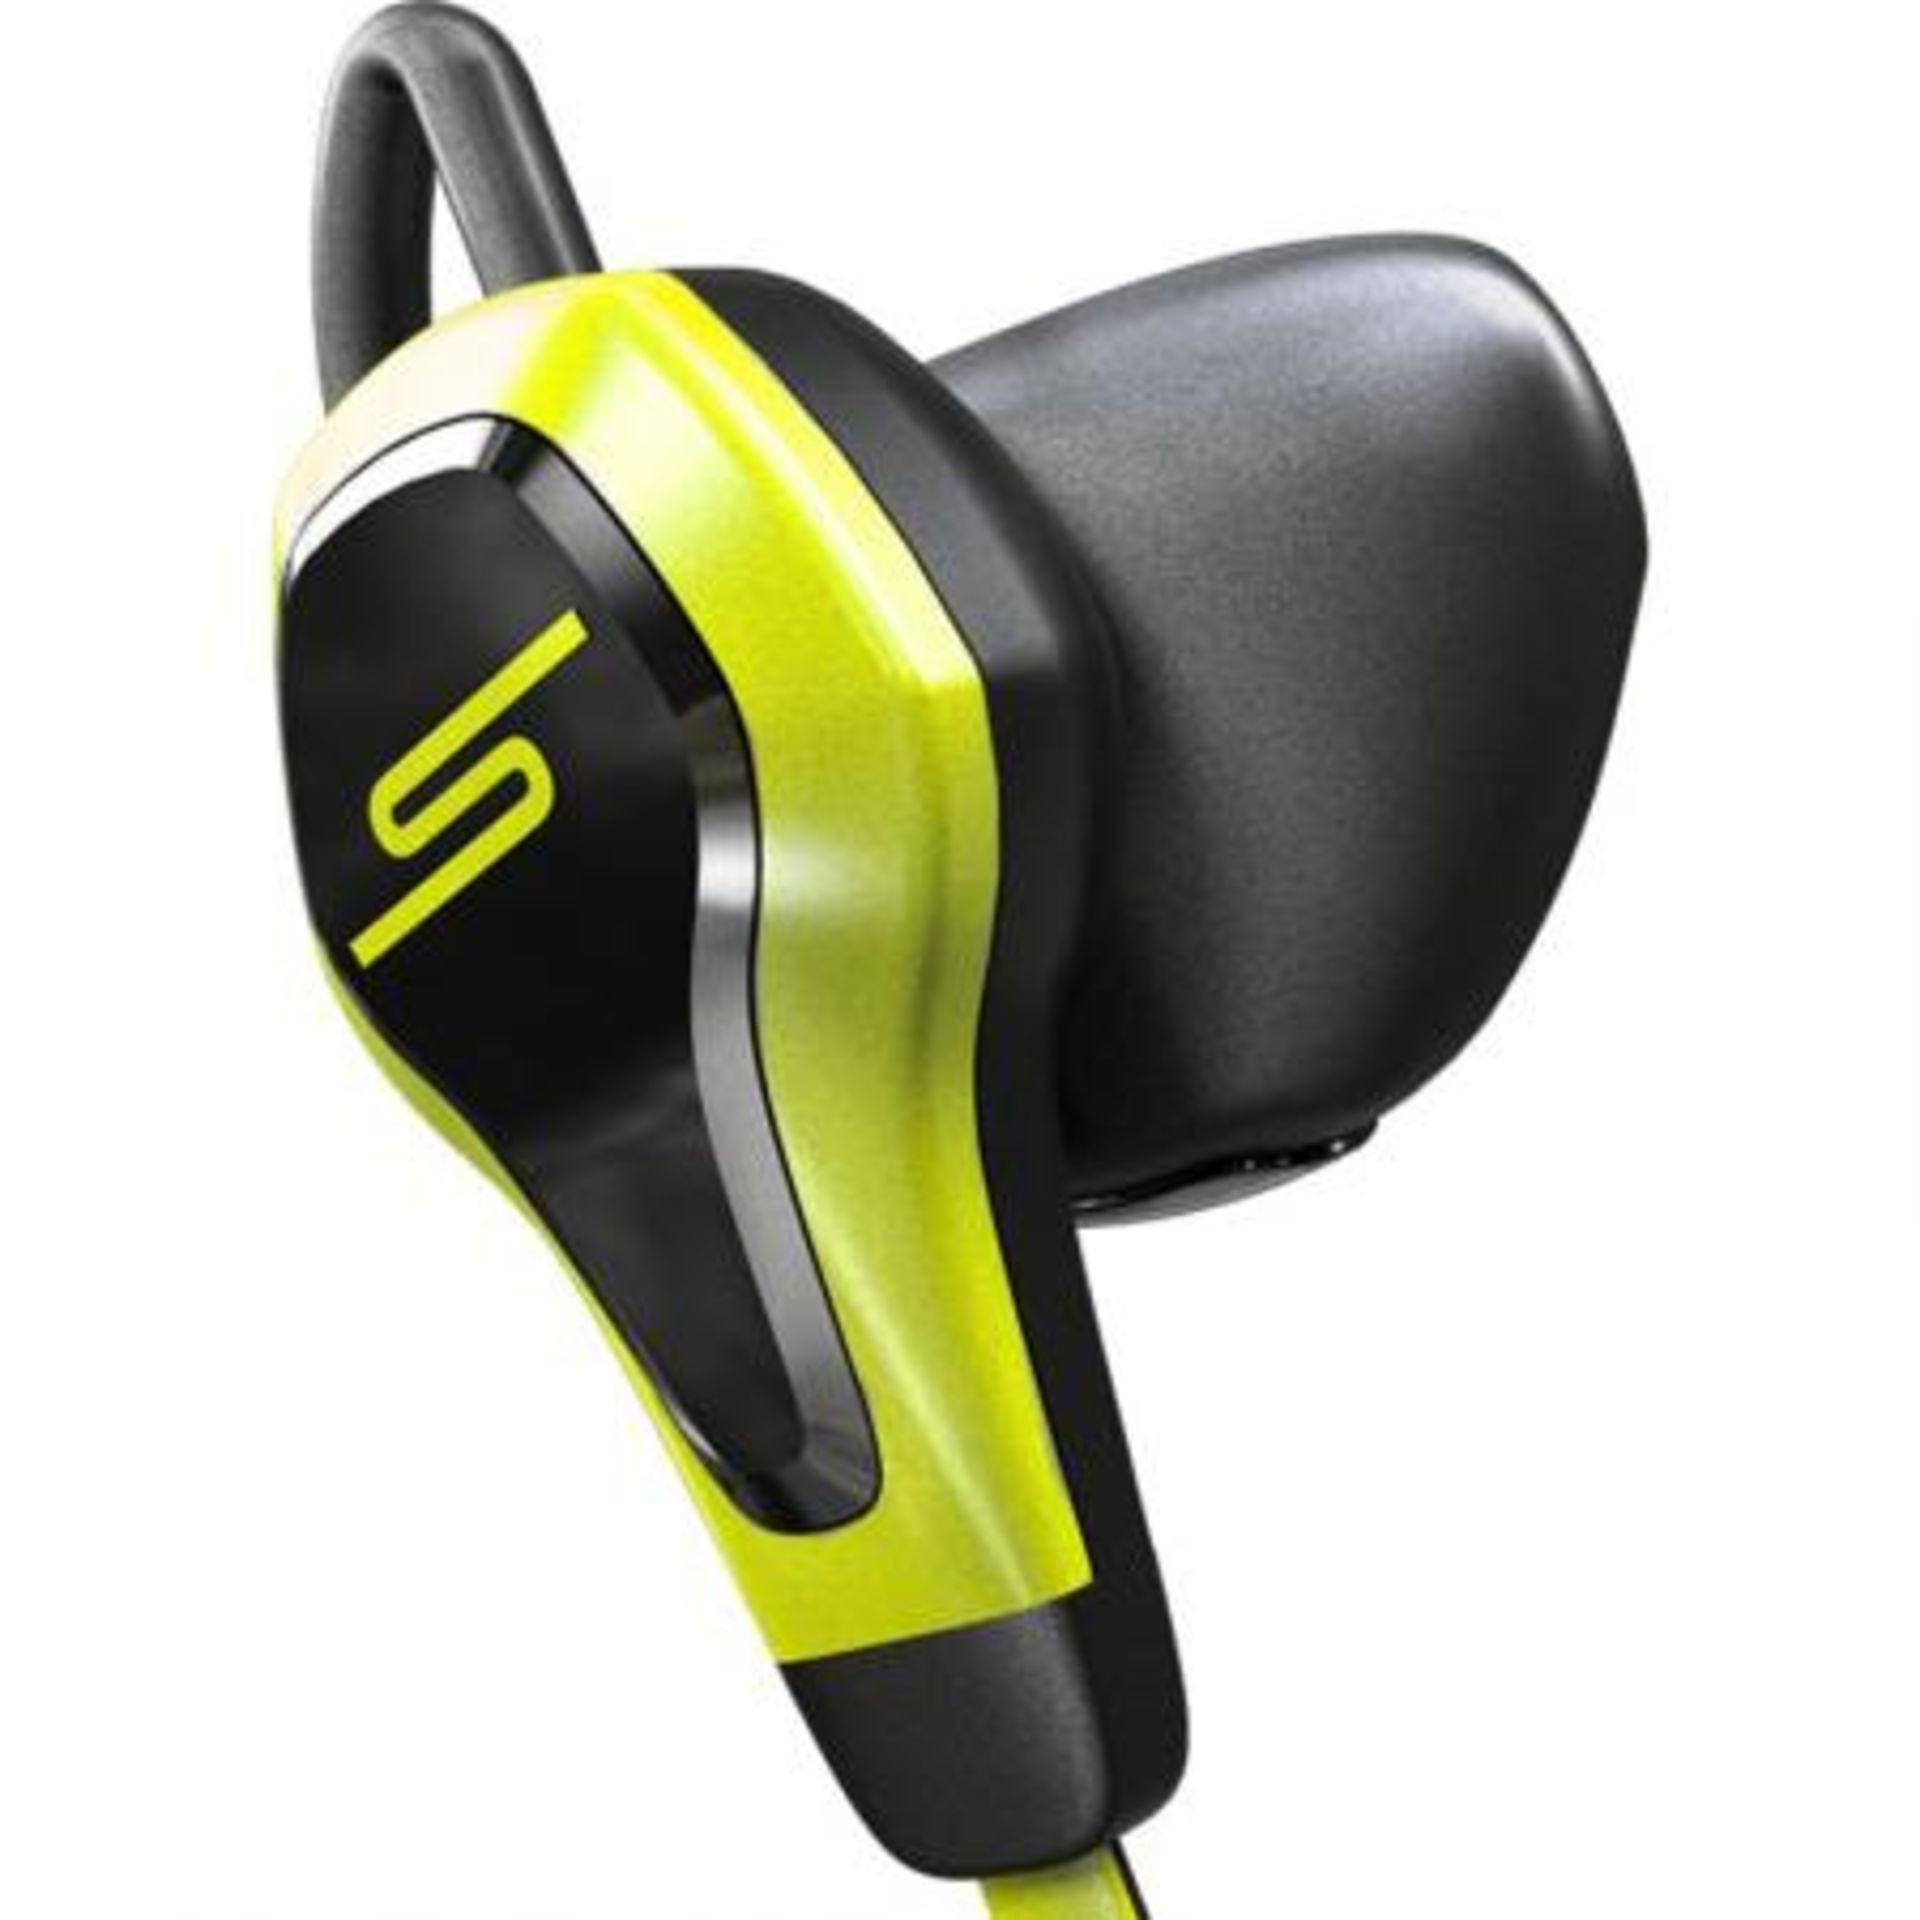 V Brand New SMS Audio BioSport Earphones - RRP £149.99 - Heart Rate Monitor Measures Changes In - Image 4 of 5